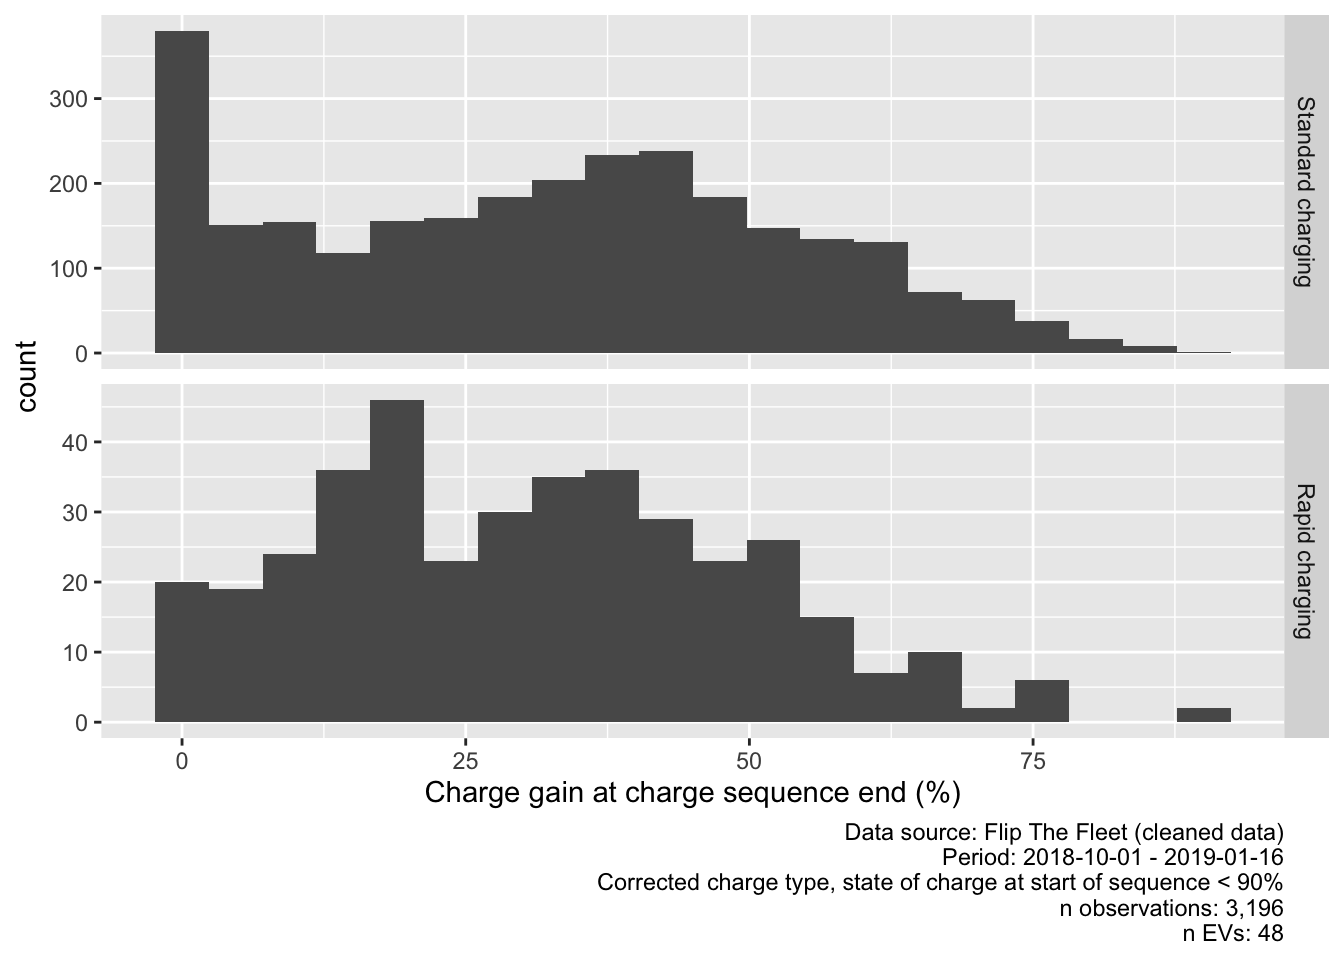 Charge gain during charging sequence (chargeType corrected, all values